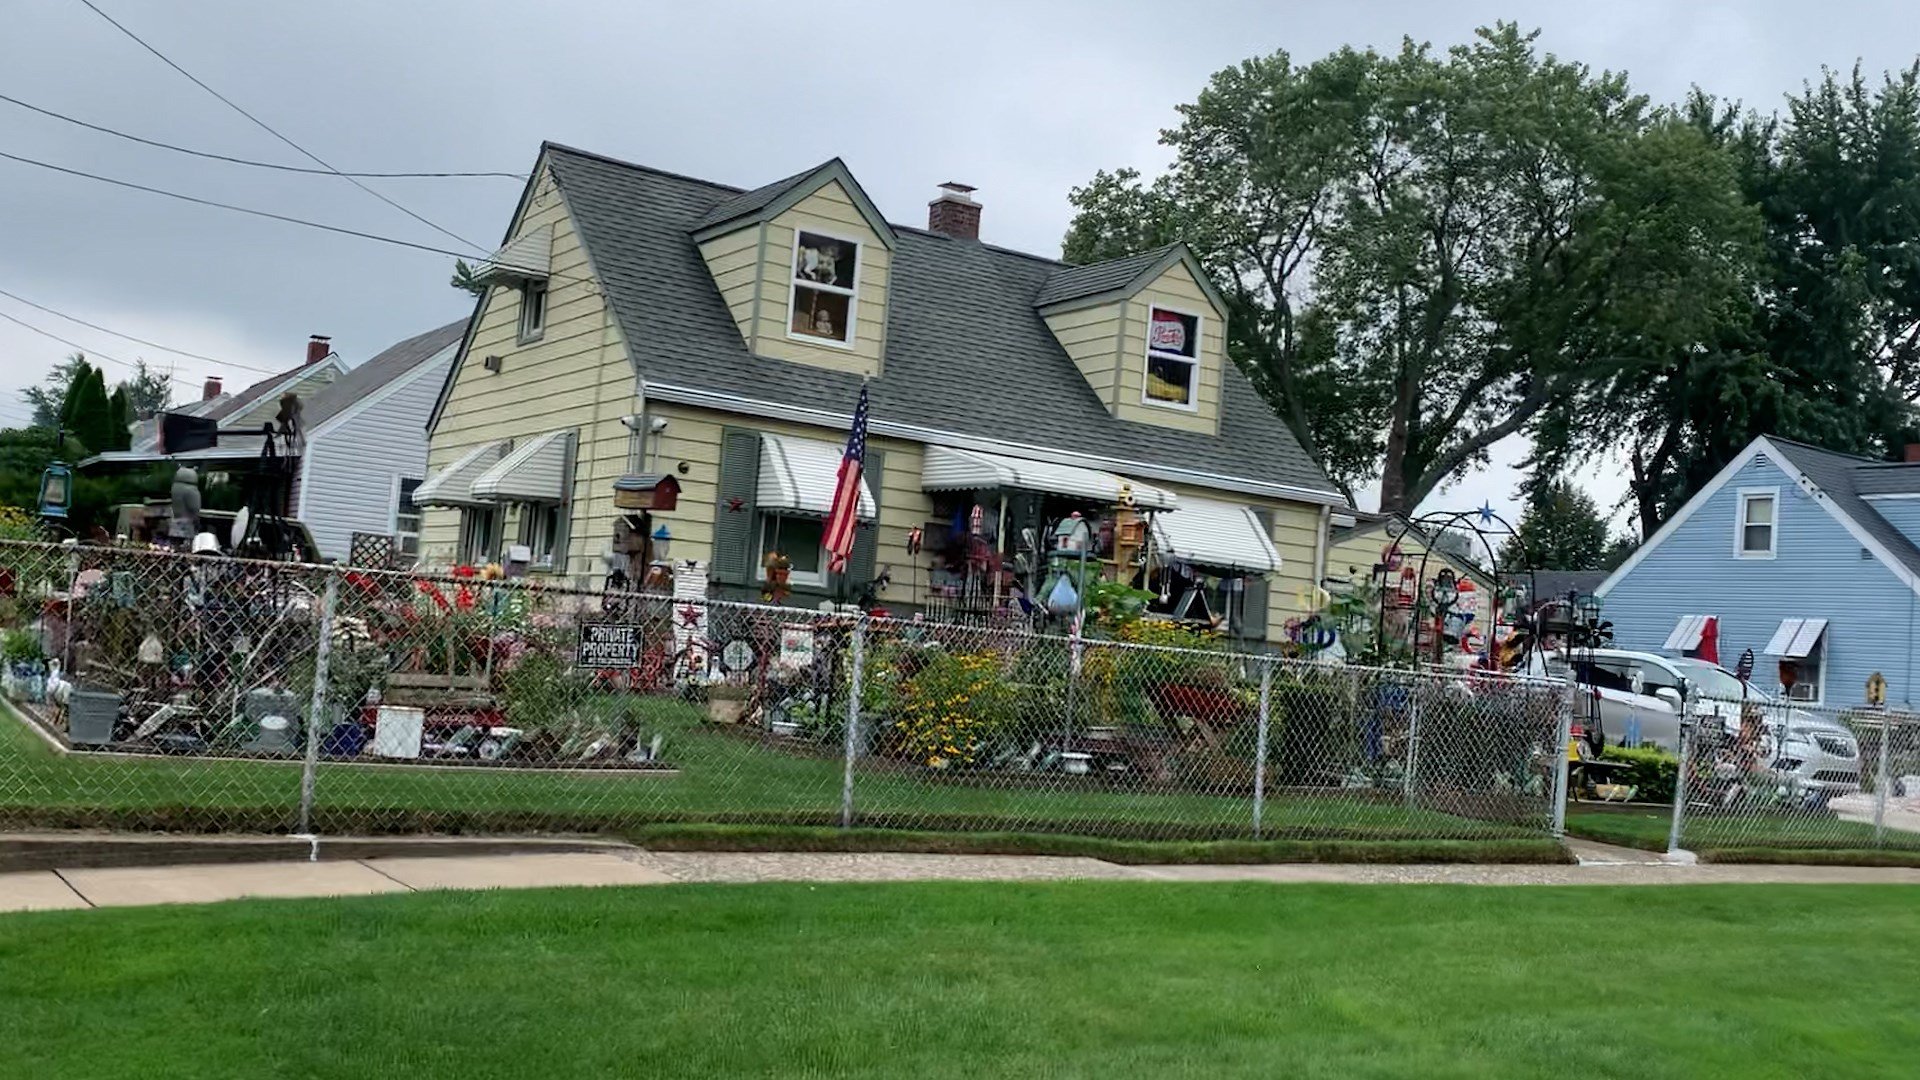 House has Hundreds of Items on Display in Front Yard